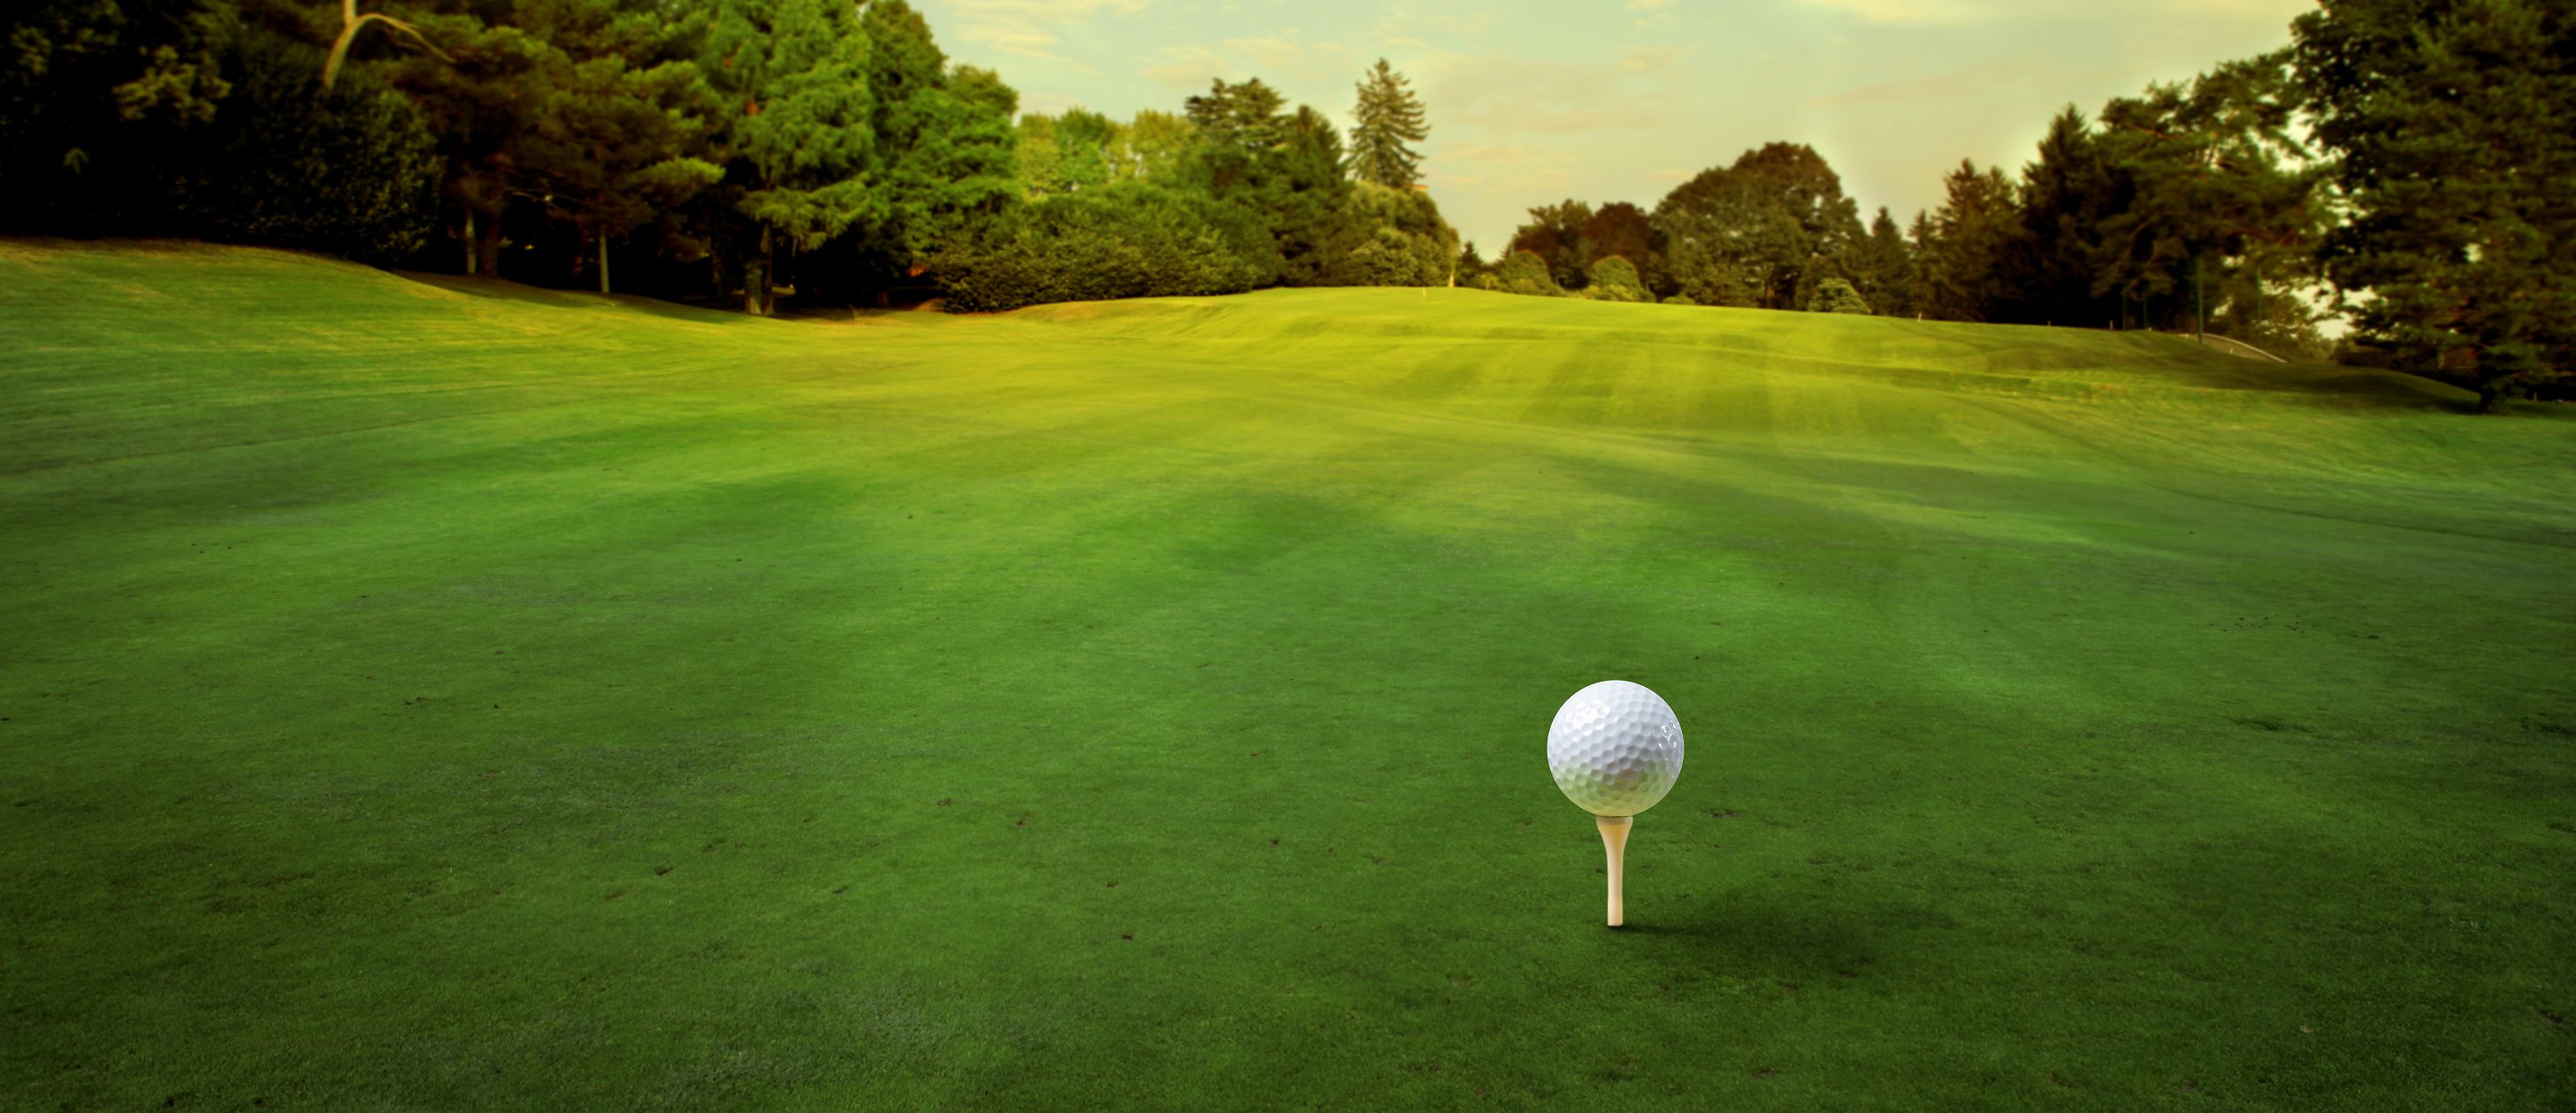 Live Golf Wallpapers